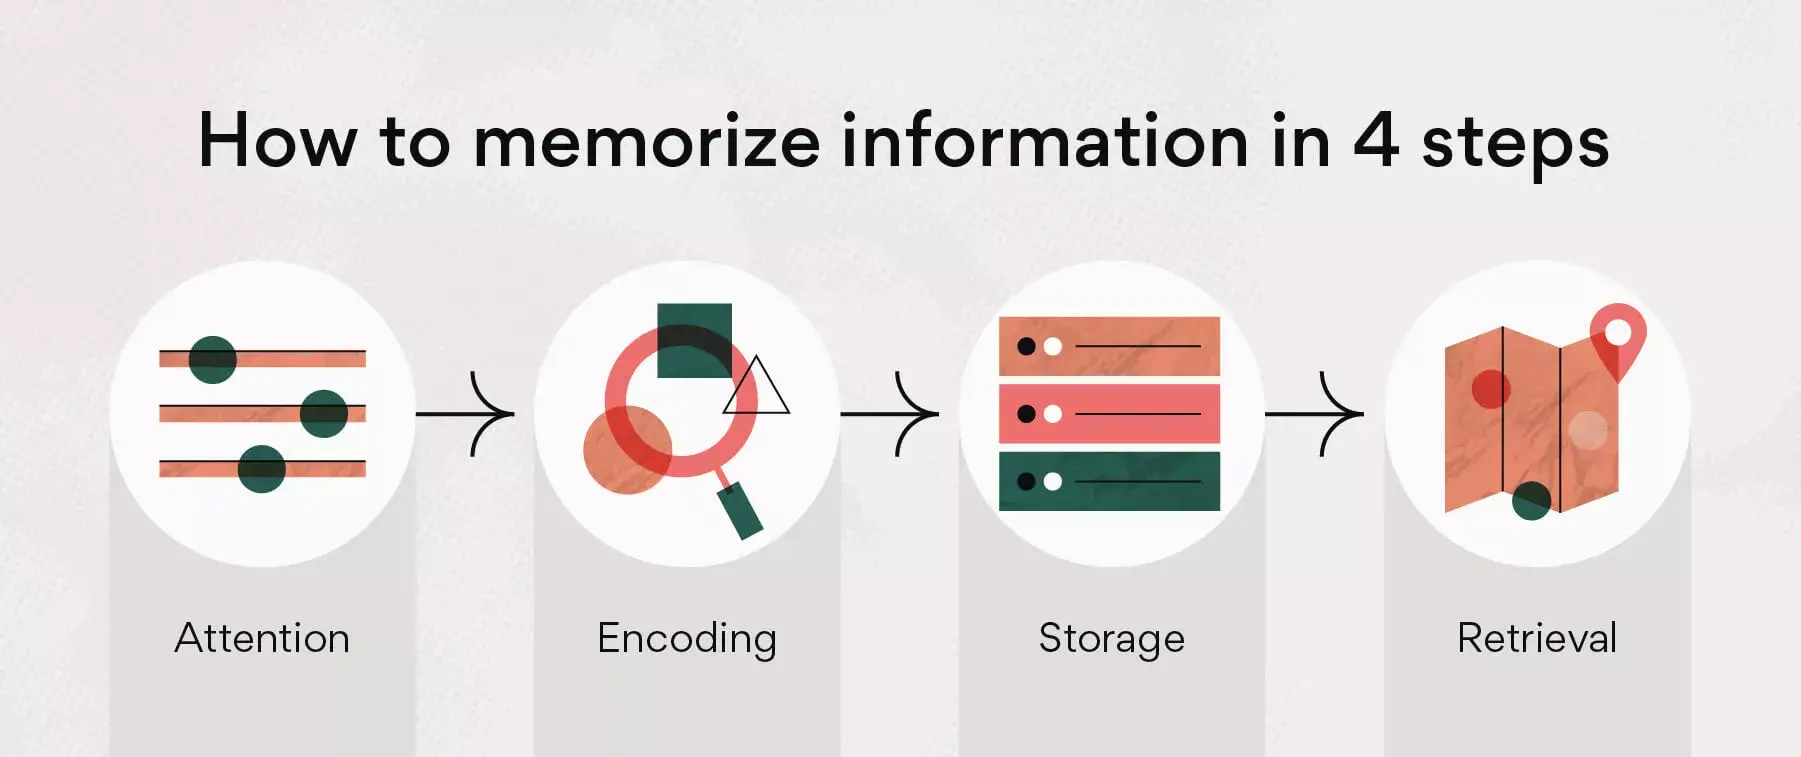 How to memorize information in 4 steps